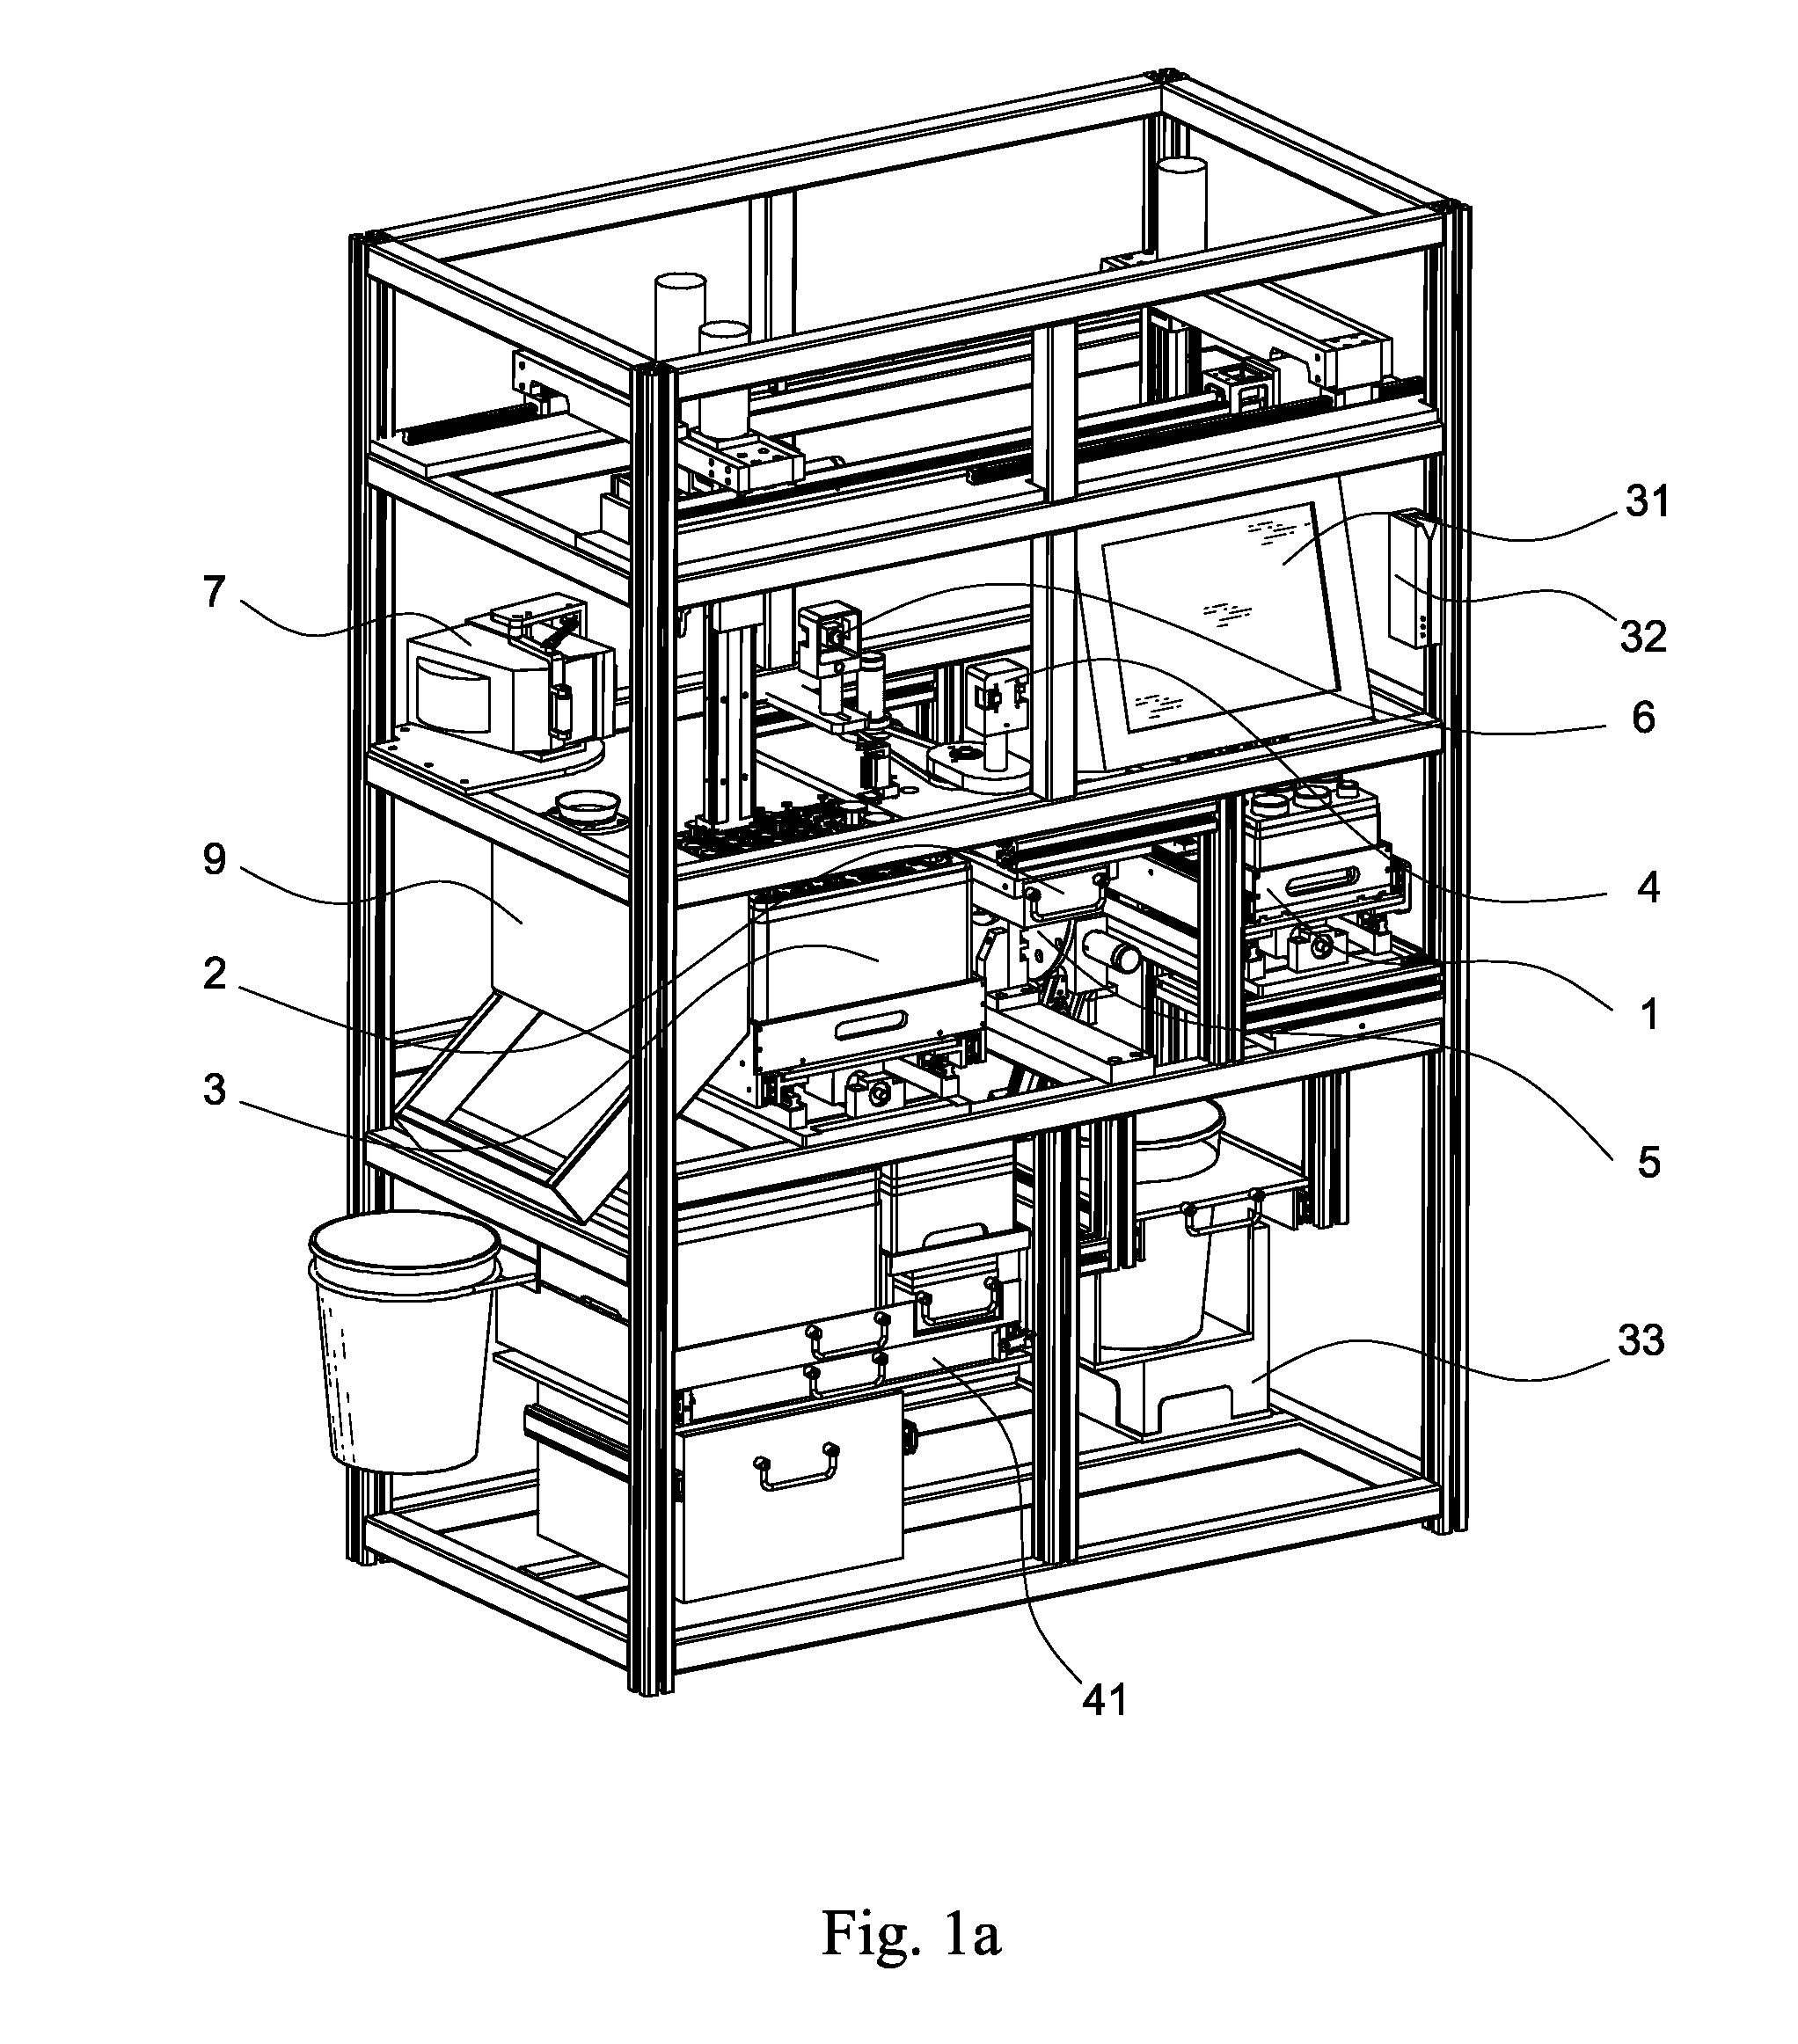 Method of dispensing ready-for-use syringes having a medication dose